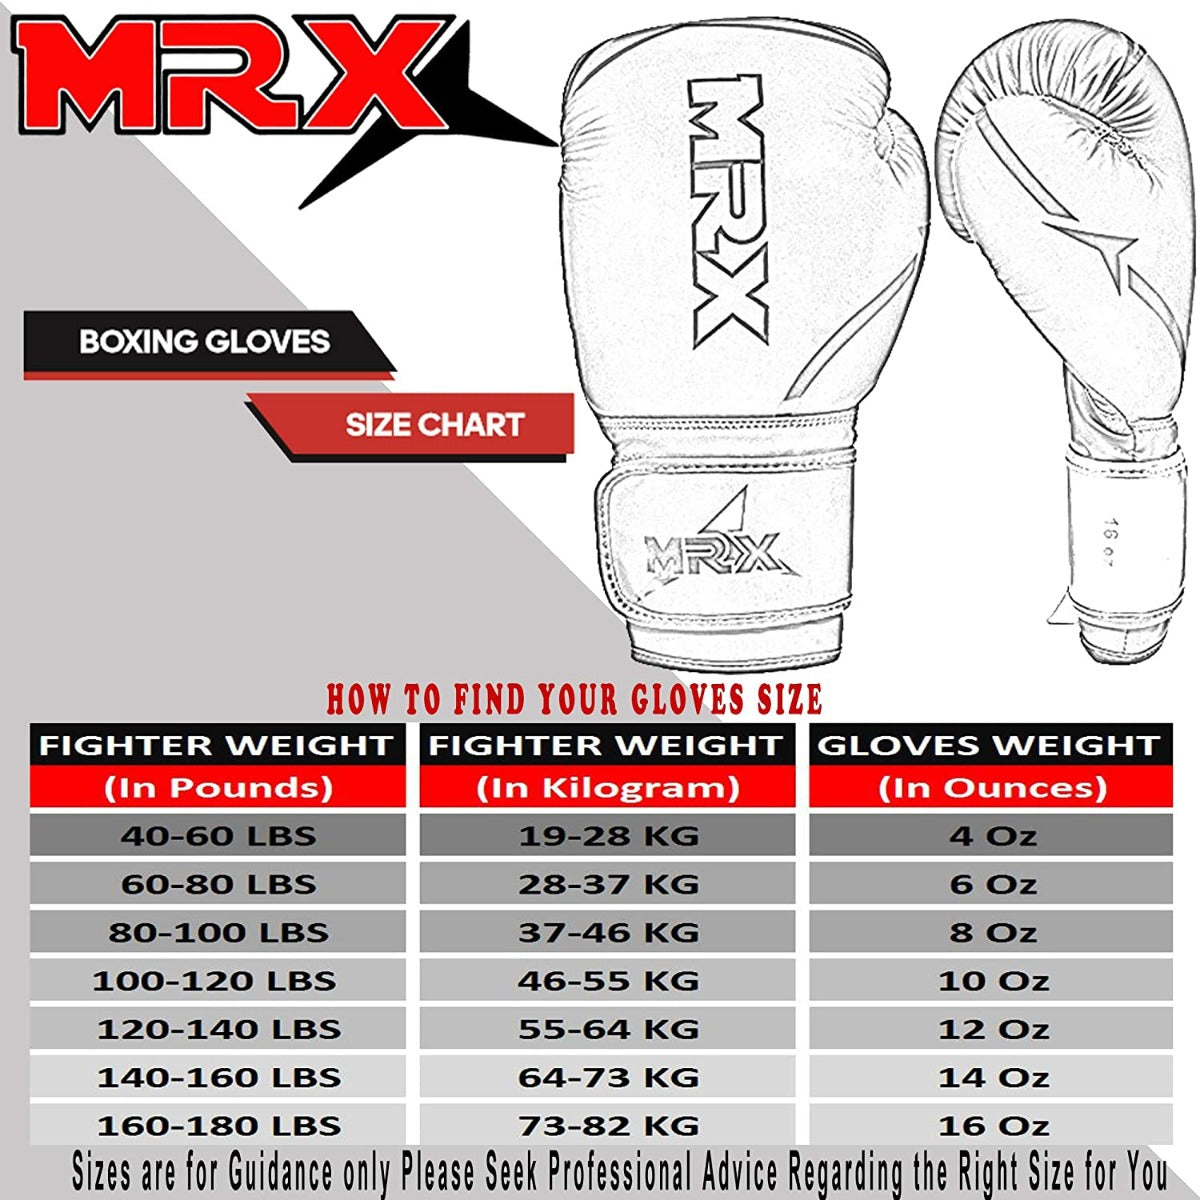 MRX Boxing Gloves Fighting Sparring Training Adult Junior Black Red Blue